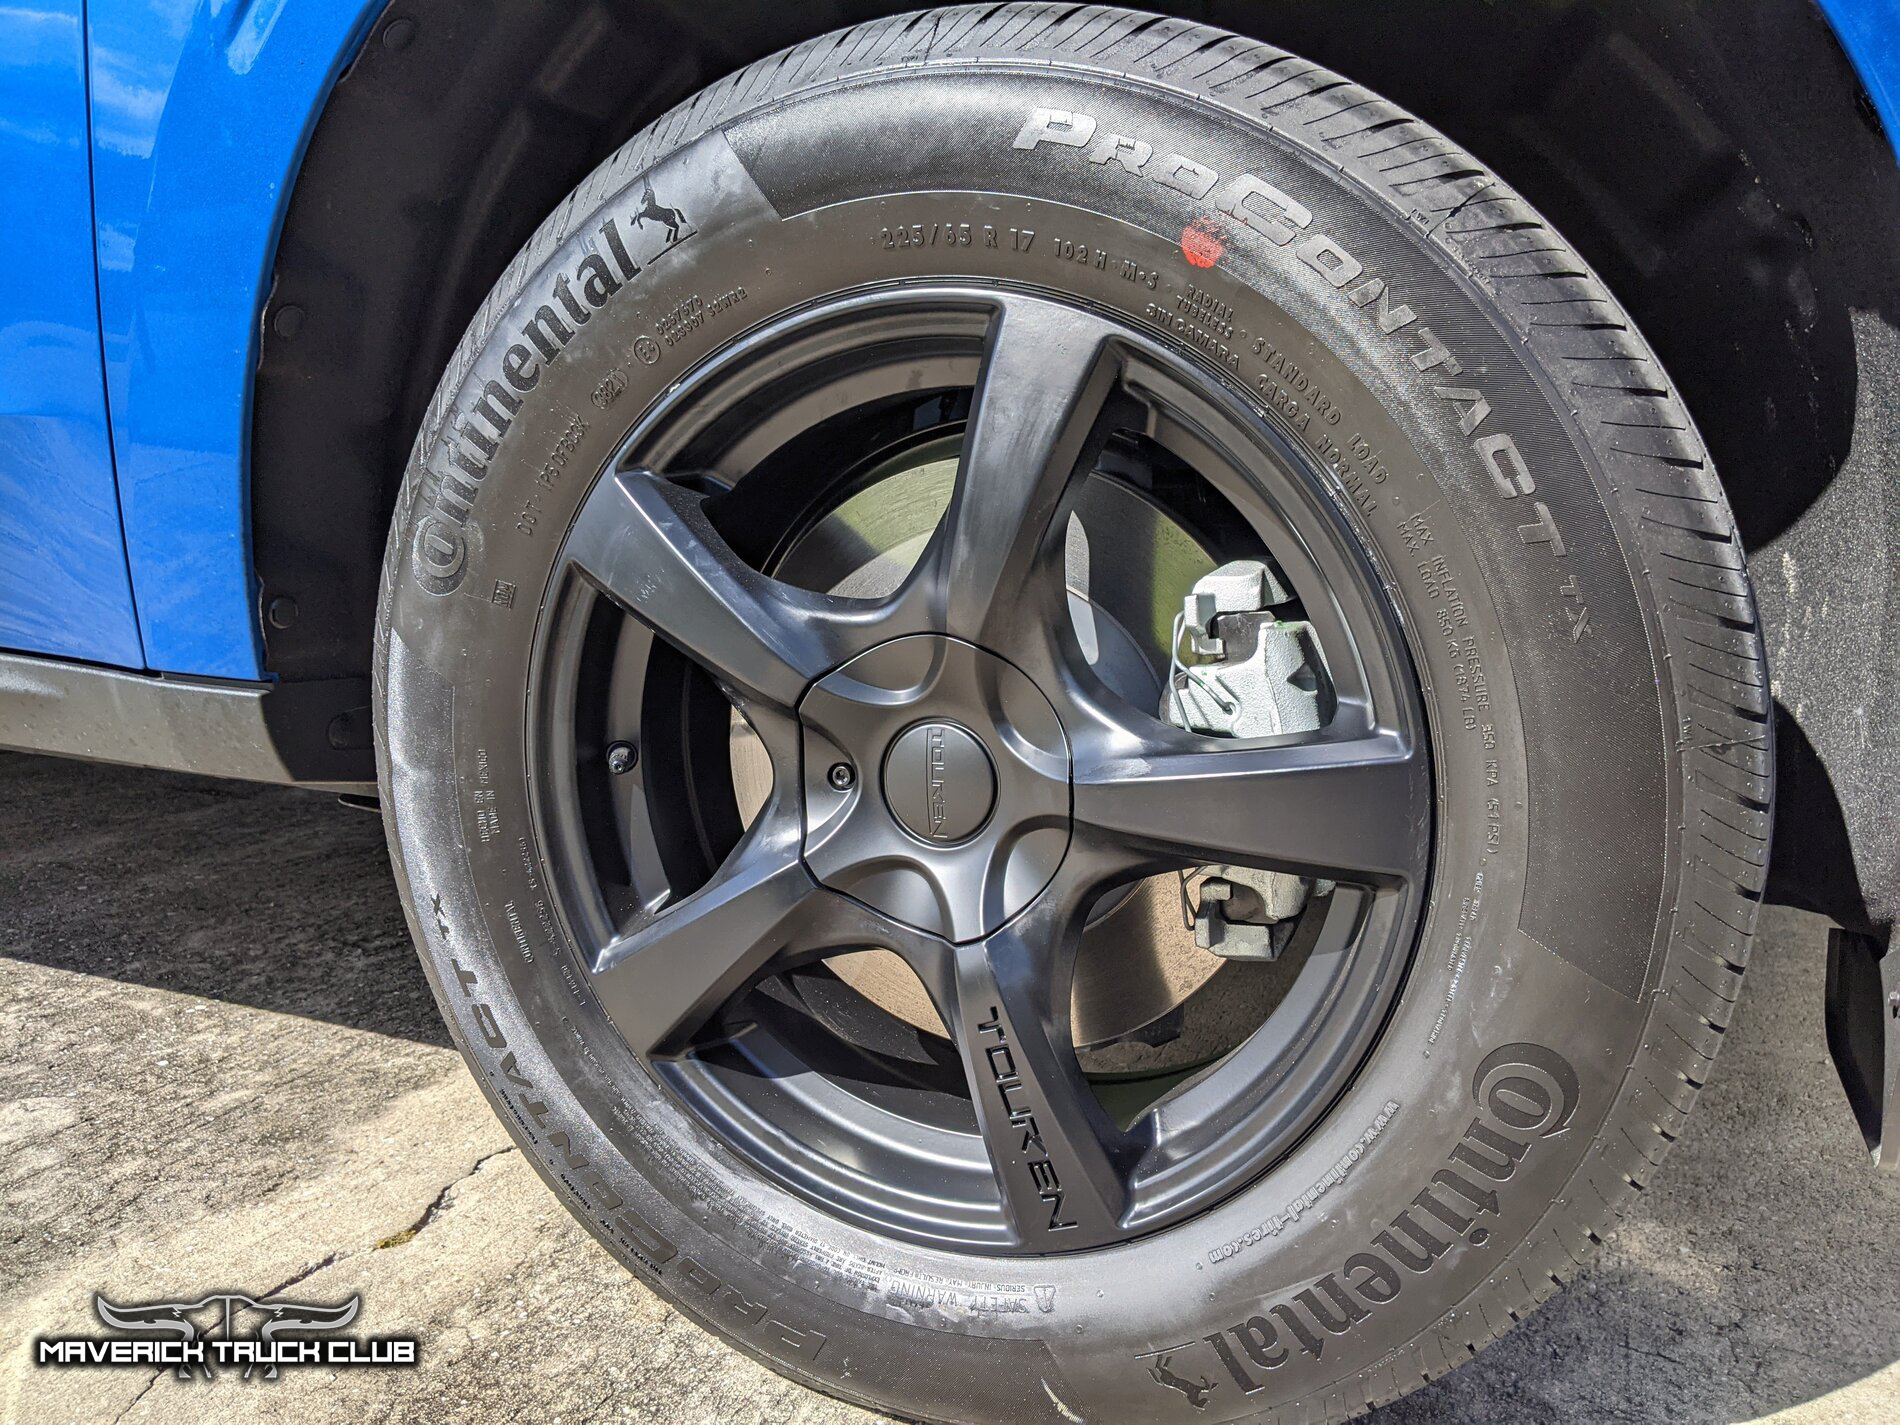 Ford Maverick Aftermarket / Custom Wheels and Tire Information and Pictures (on Ford Maverick) 17%22 Touren TR9 black wheels on 2022 Ford Maverick Velocity Blue 1